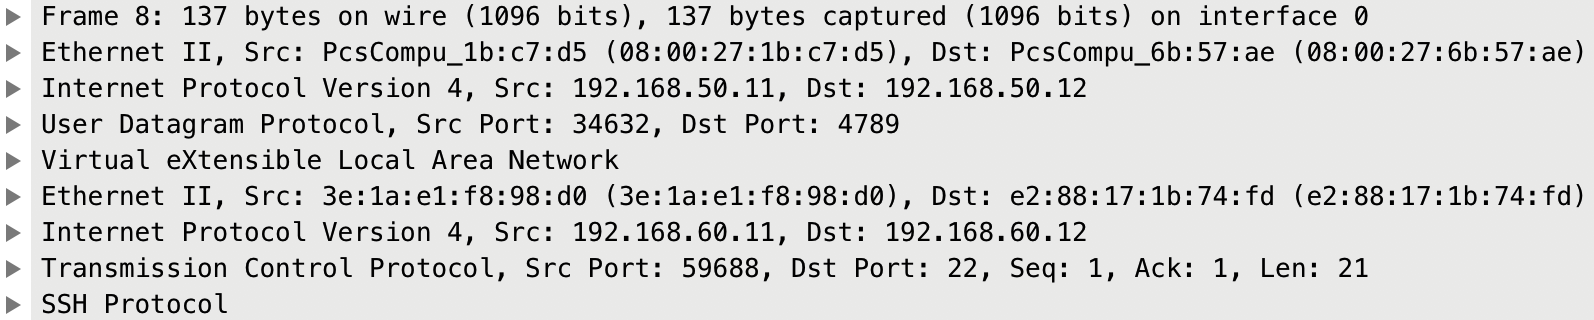 ssh packet on some virtualised network